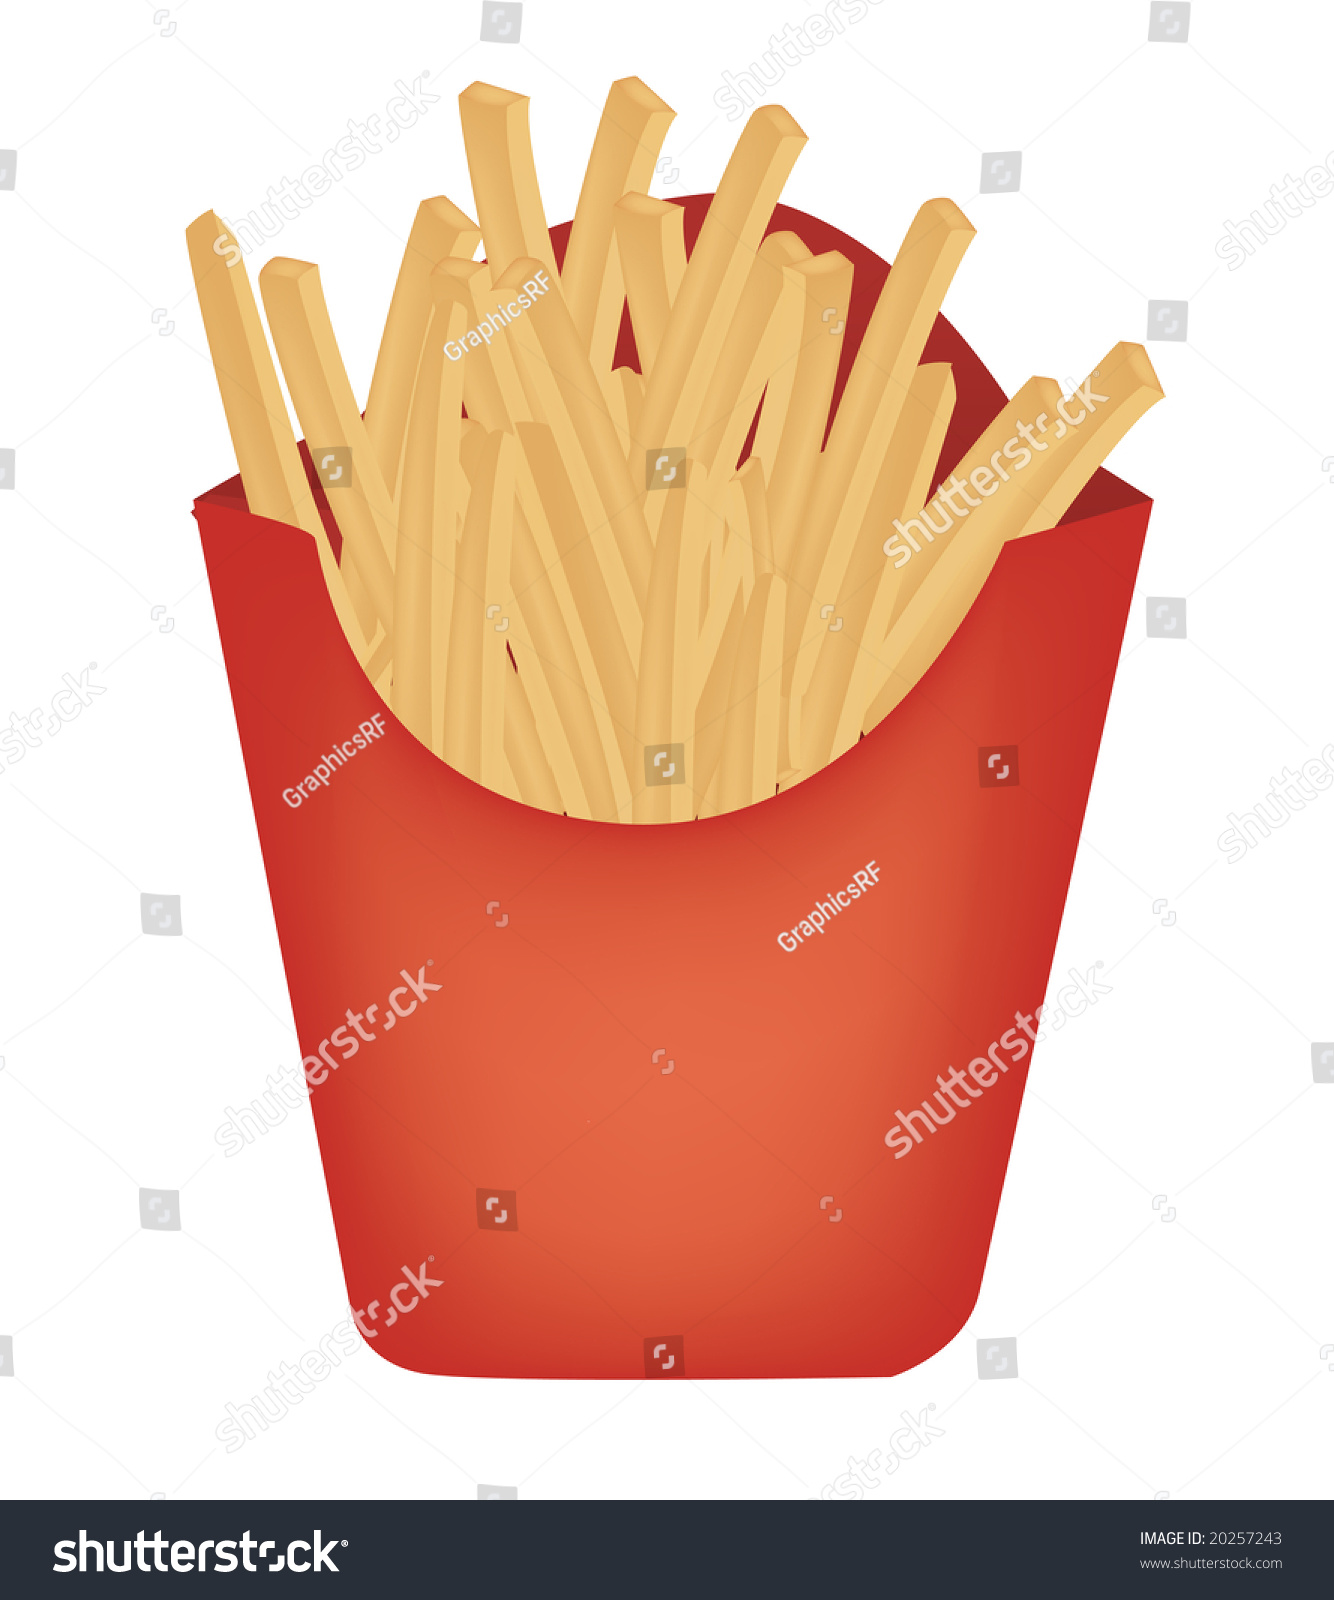 Packet Of French Fries Illustration - 20257243 : Shutterstock